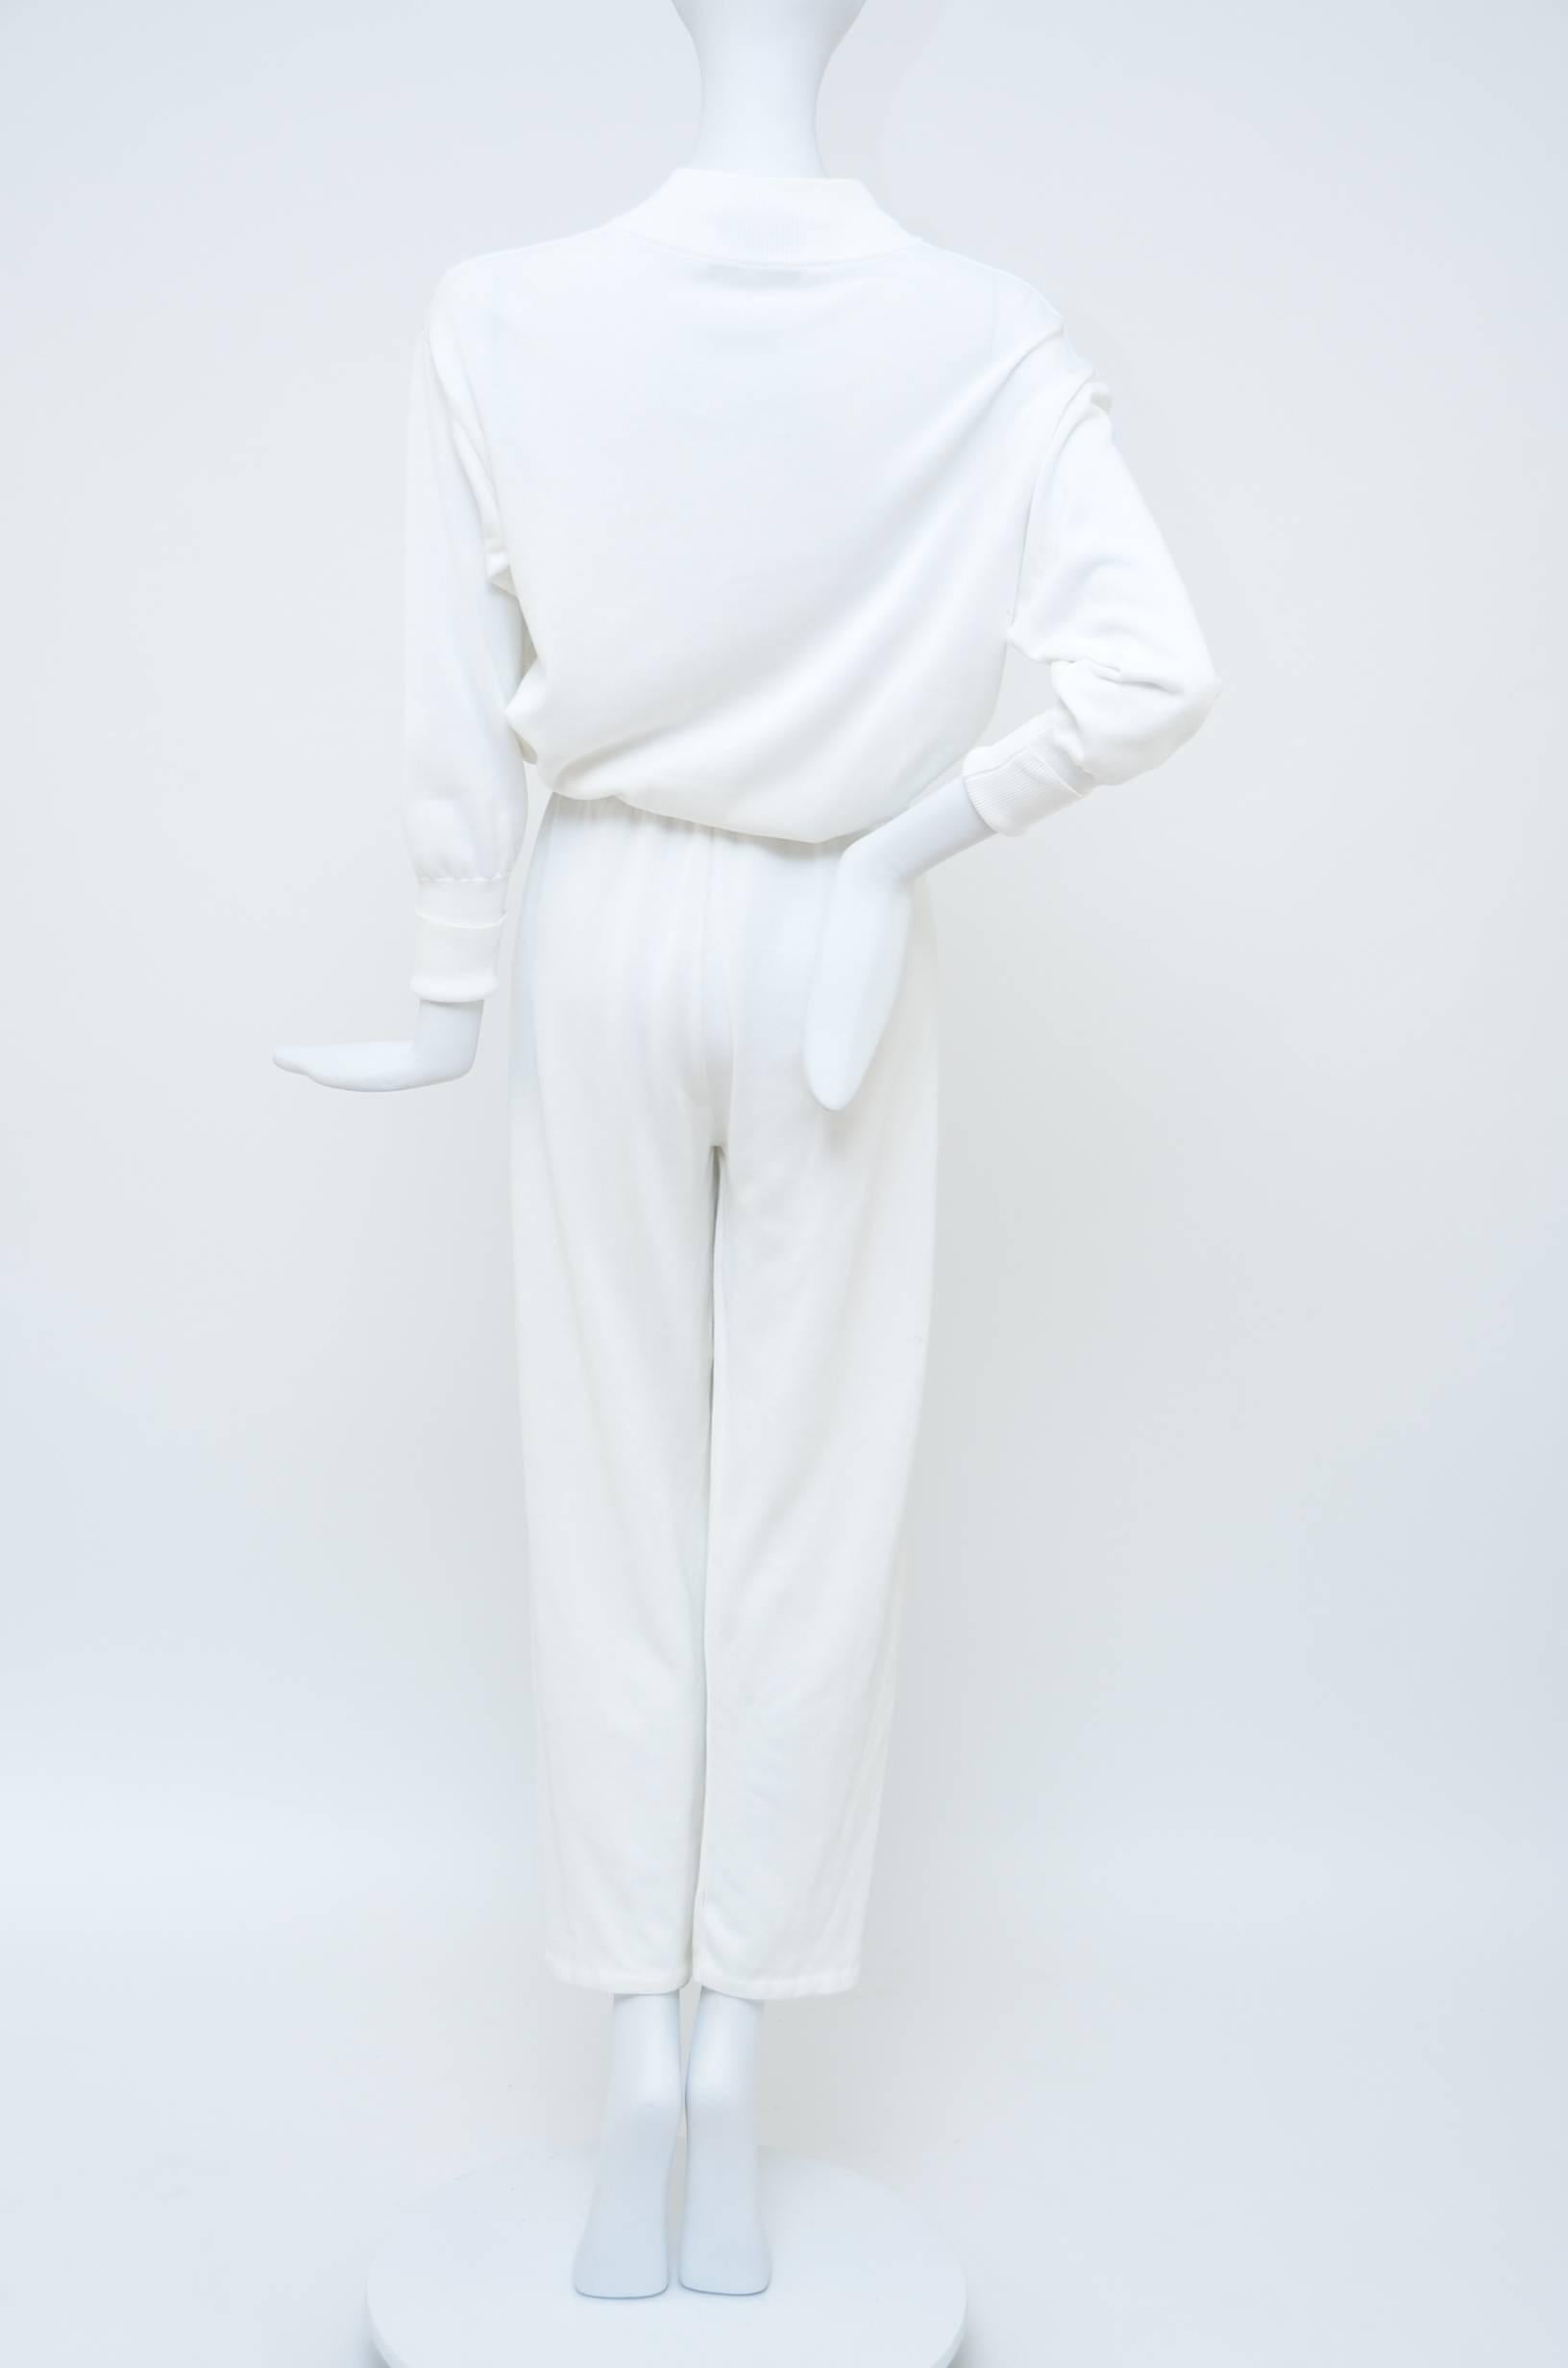 Chanel vintage jumpsuit.
Fabric :off white knit.
Very good condition.
Please note:one top button missing.
No size or fabric content.Only Chanel boutique label present.

Final Sale.